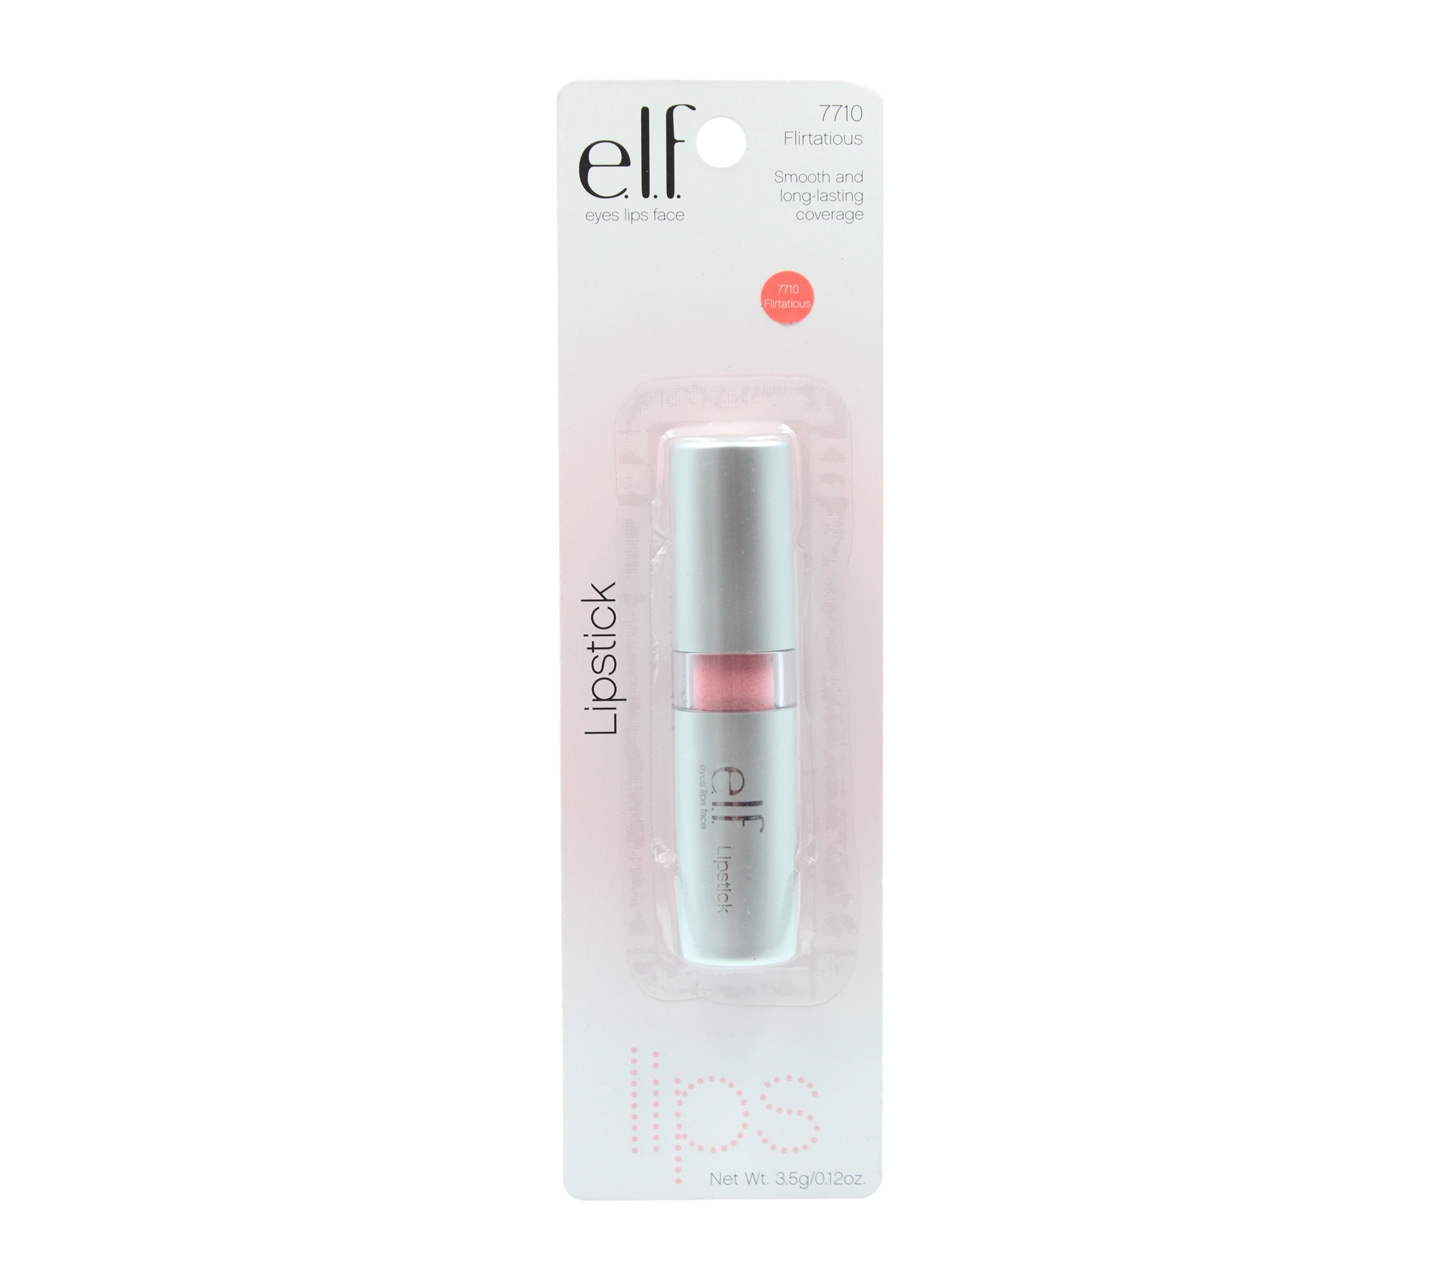 E.L.F Eyes Lips Face 7710 Flirtatious Smooth And Long-Lasting Coverage